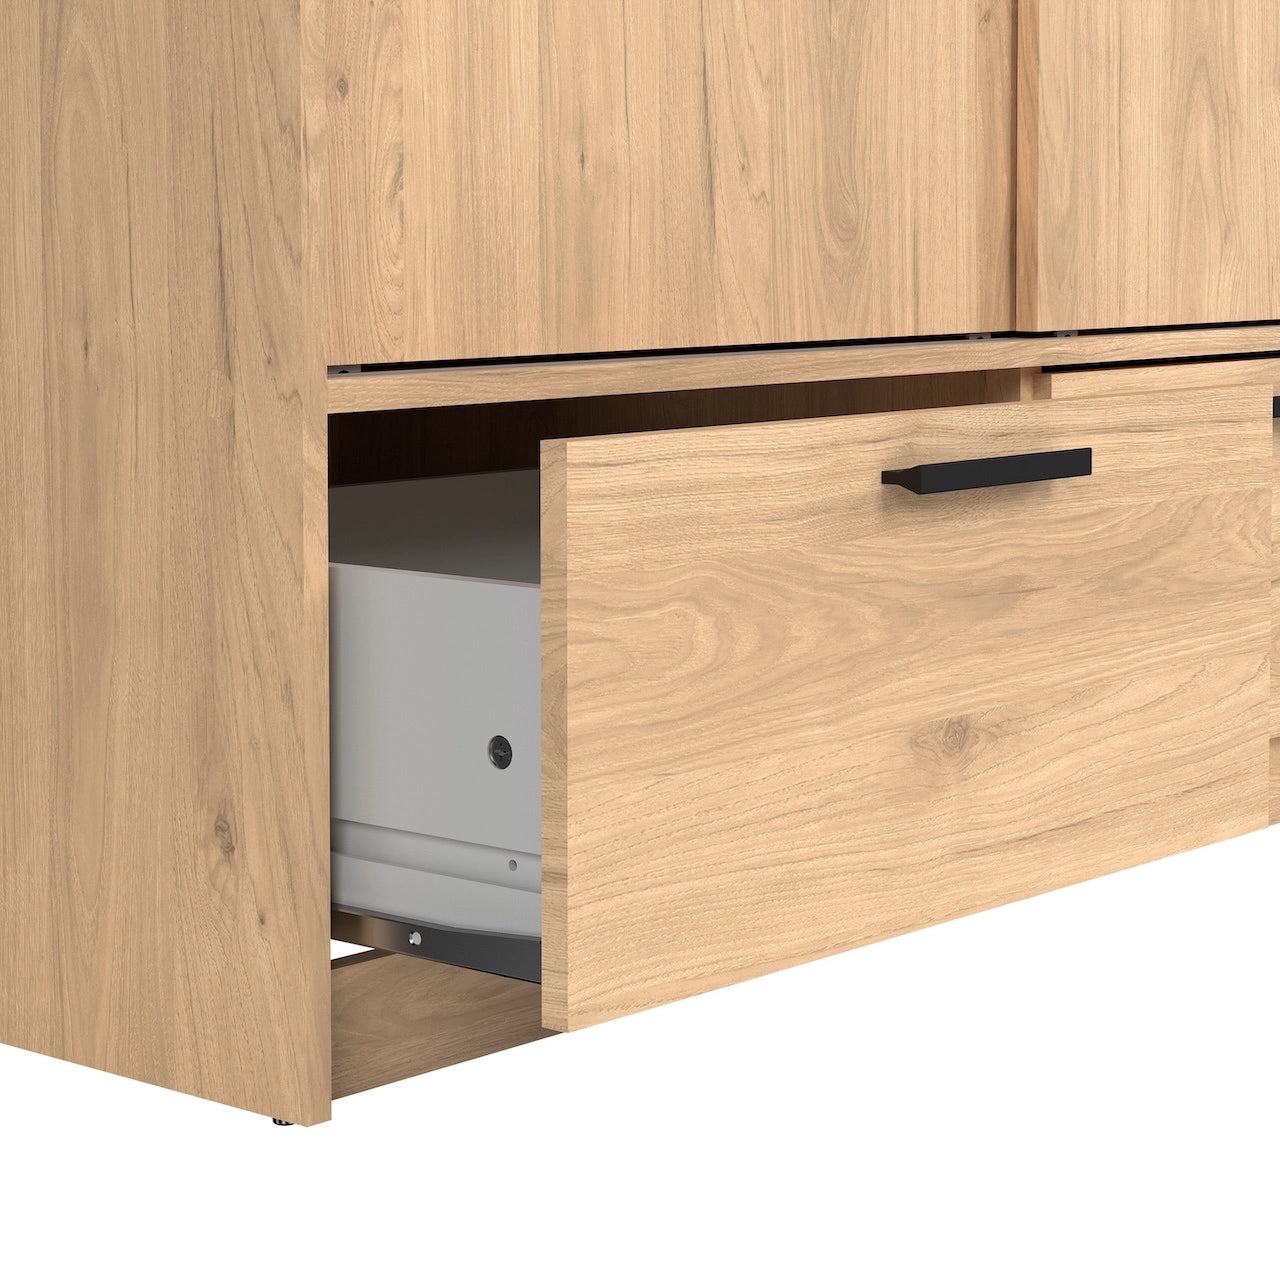 Furniture To Go Line Wardrobe with 2 Doors + 2 Drawers in Jackson Hickory Oak